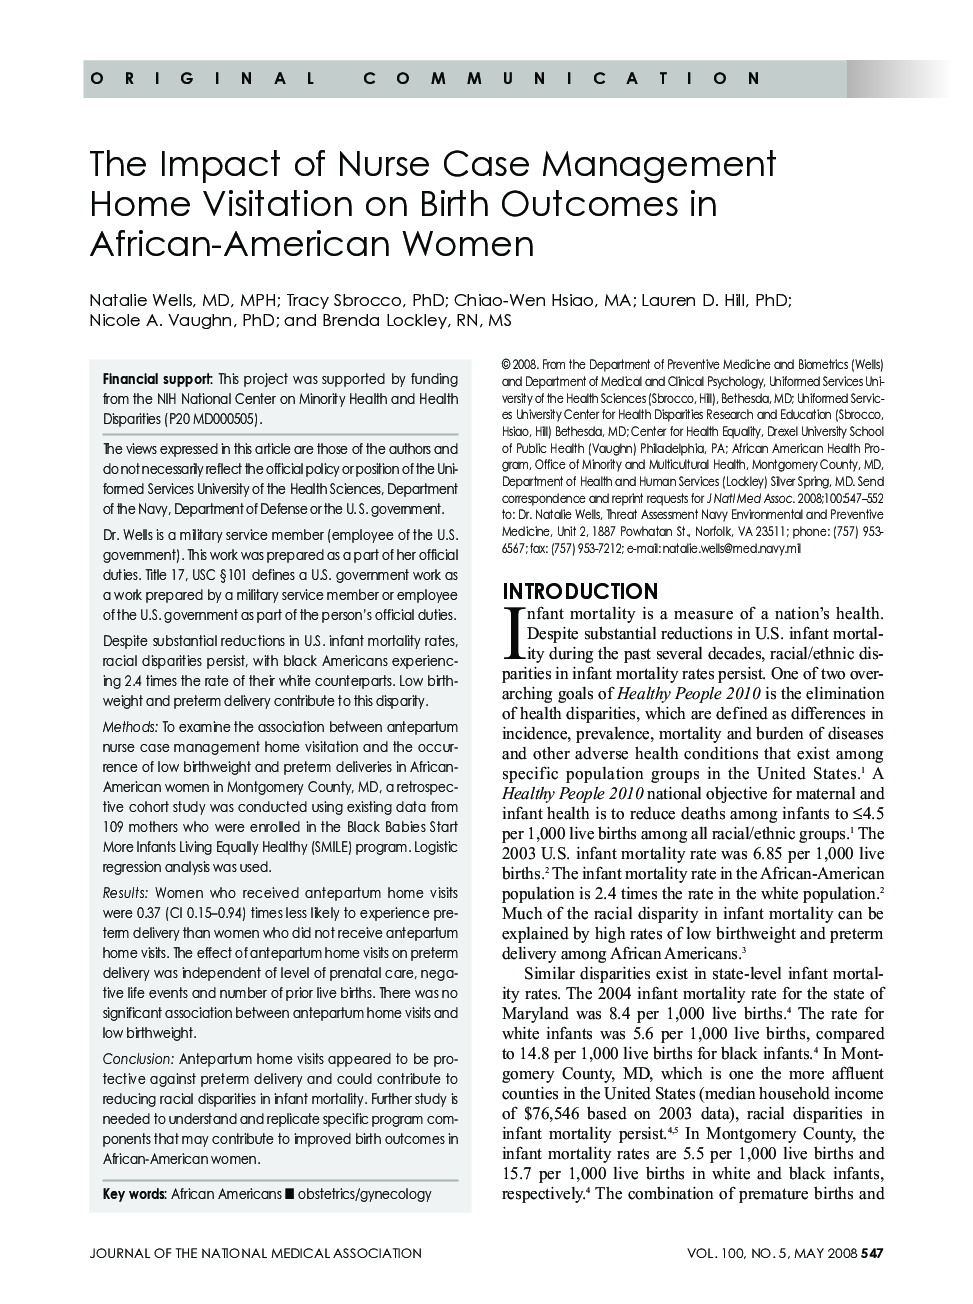 The Impact of Nurse Case Management Home Visitation on Birth Outcomes in African-American Women